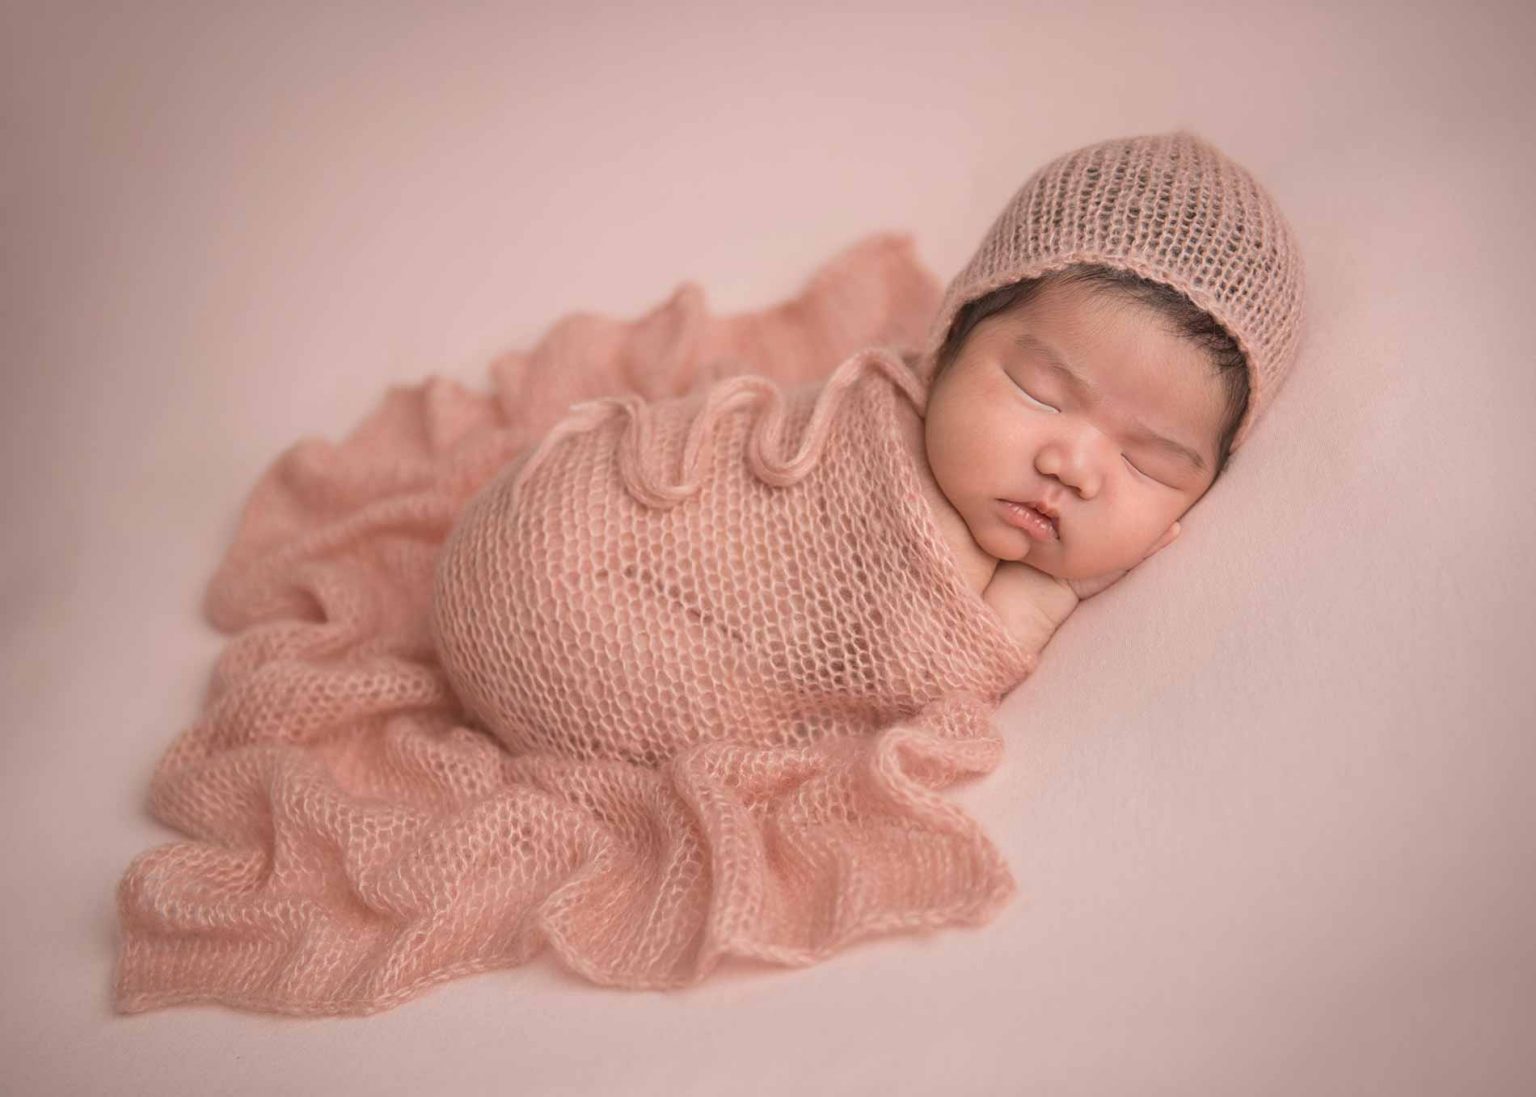 Infant girl sleeping on a pink knit blanket